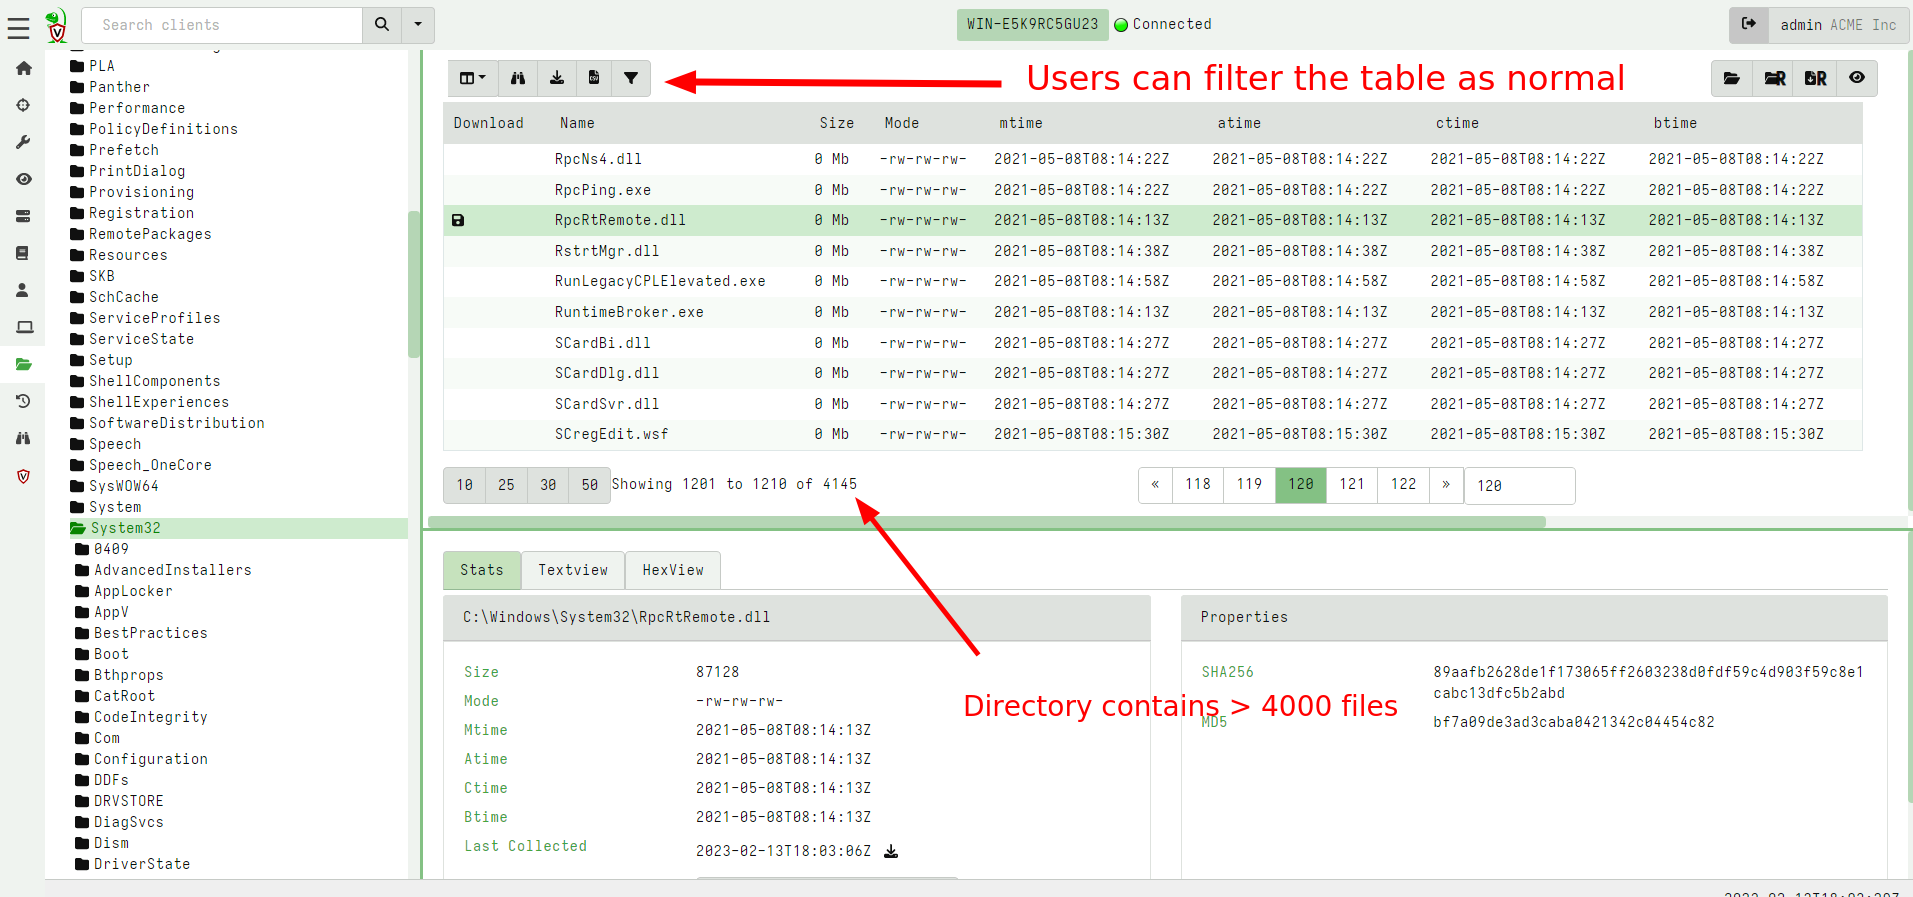 Inspecting a large directory is faster with paging tables.